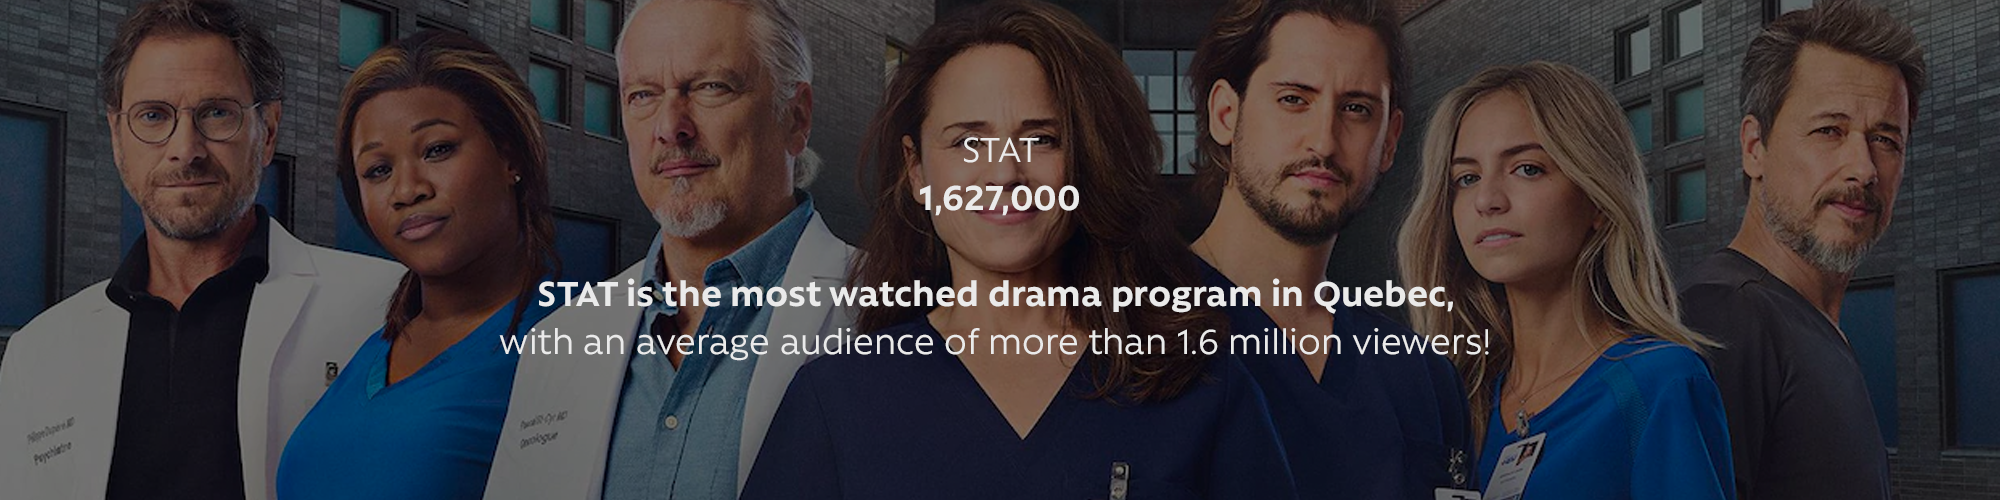 STAT (1,627,000): STAT is the most watched drama program in Quebec, with an average audience of more than 1.6 million viewers!